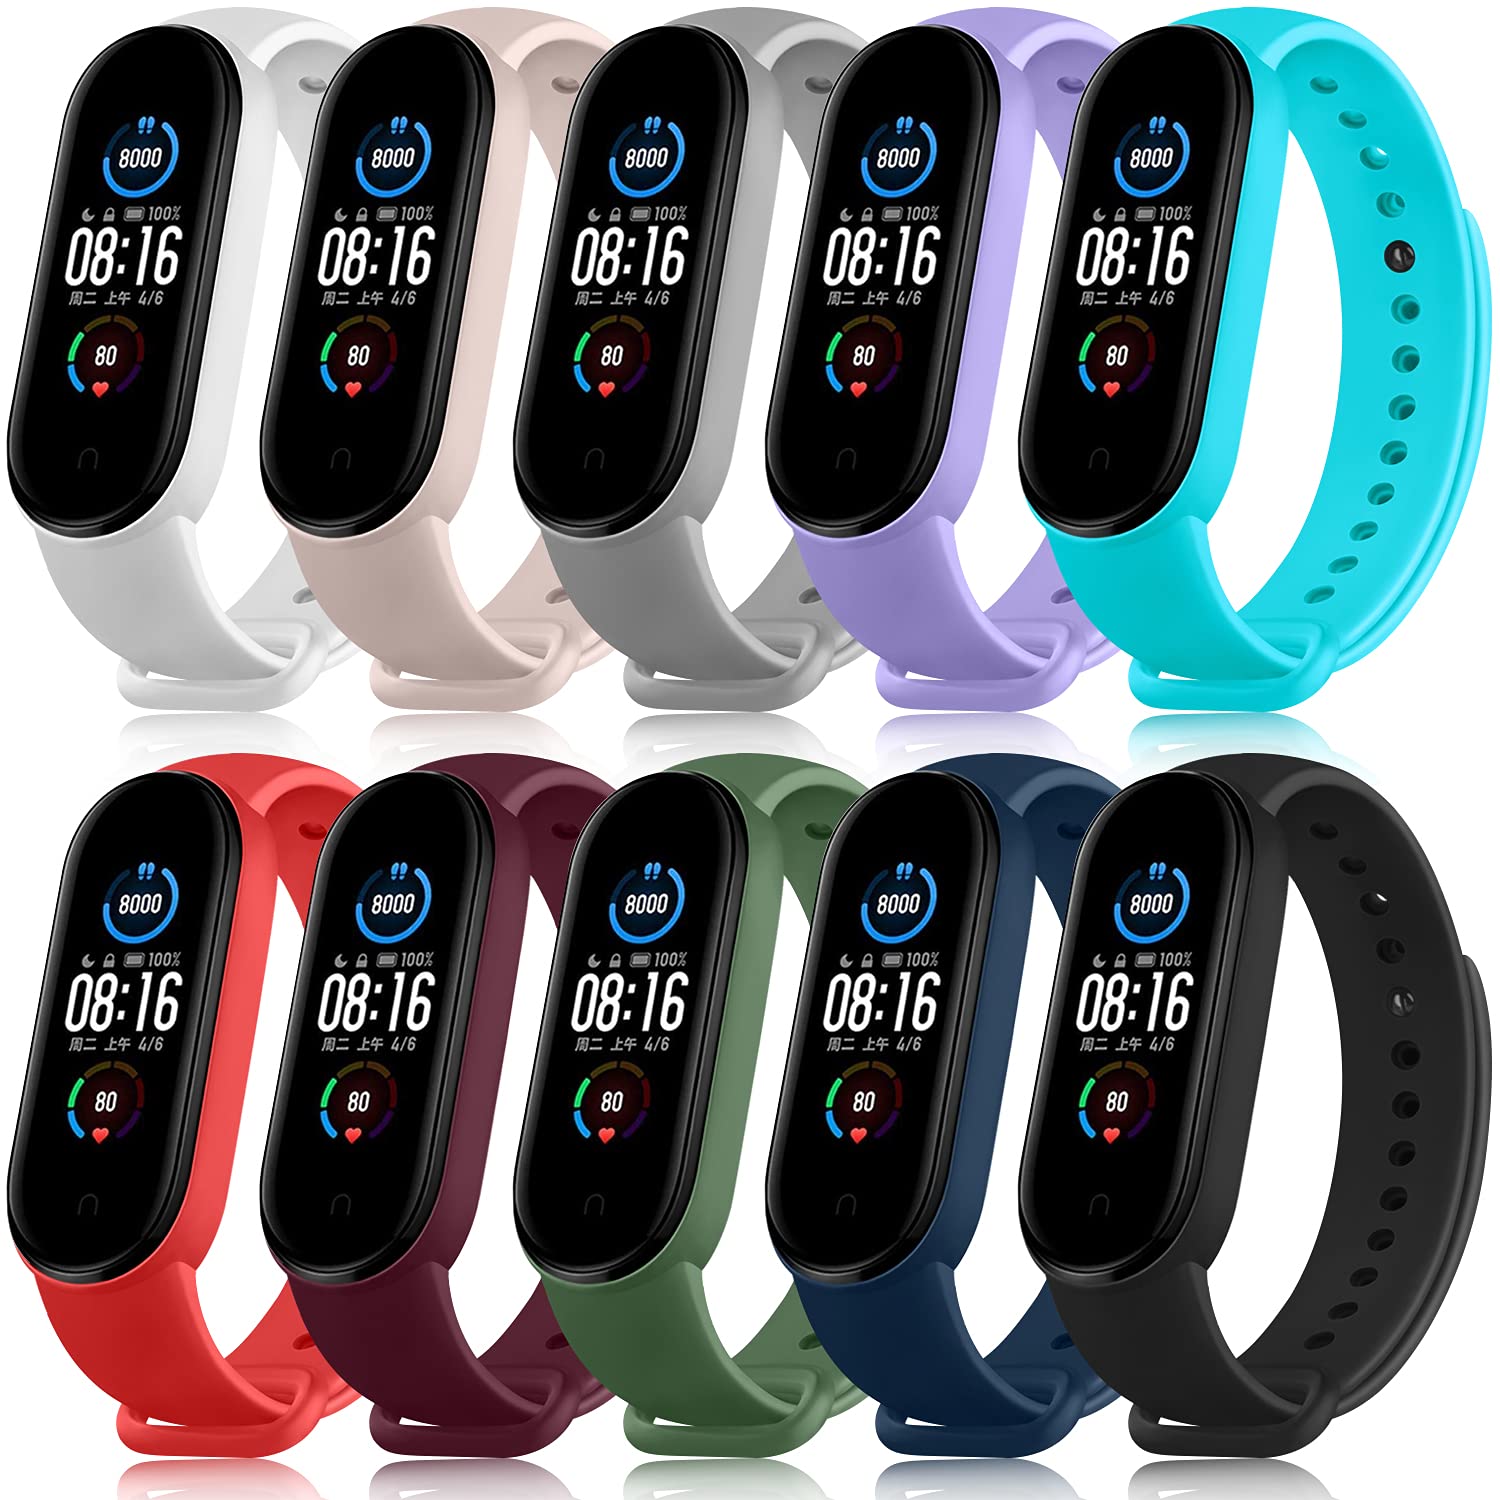  [4 Packs] Bands for Mi Band 7 Strap Replacement Wristband  Xiaomi Mi Band 7 Accessories Watch Band for Men Women Xiaomi 7 Wrist Band :  Electronics